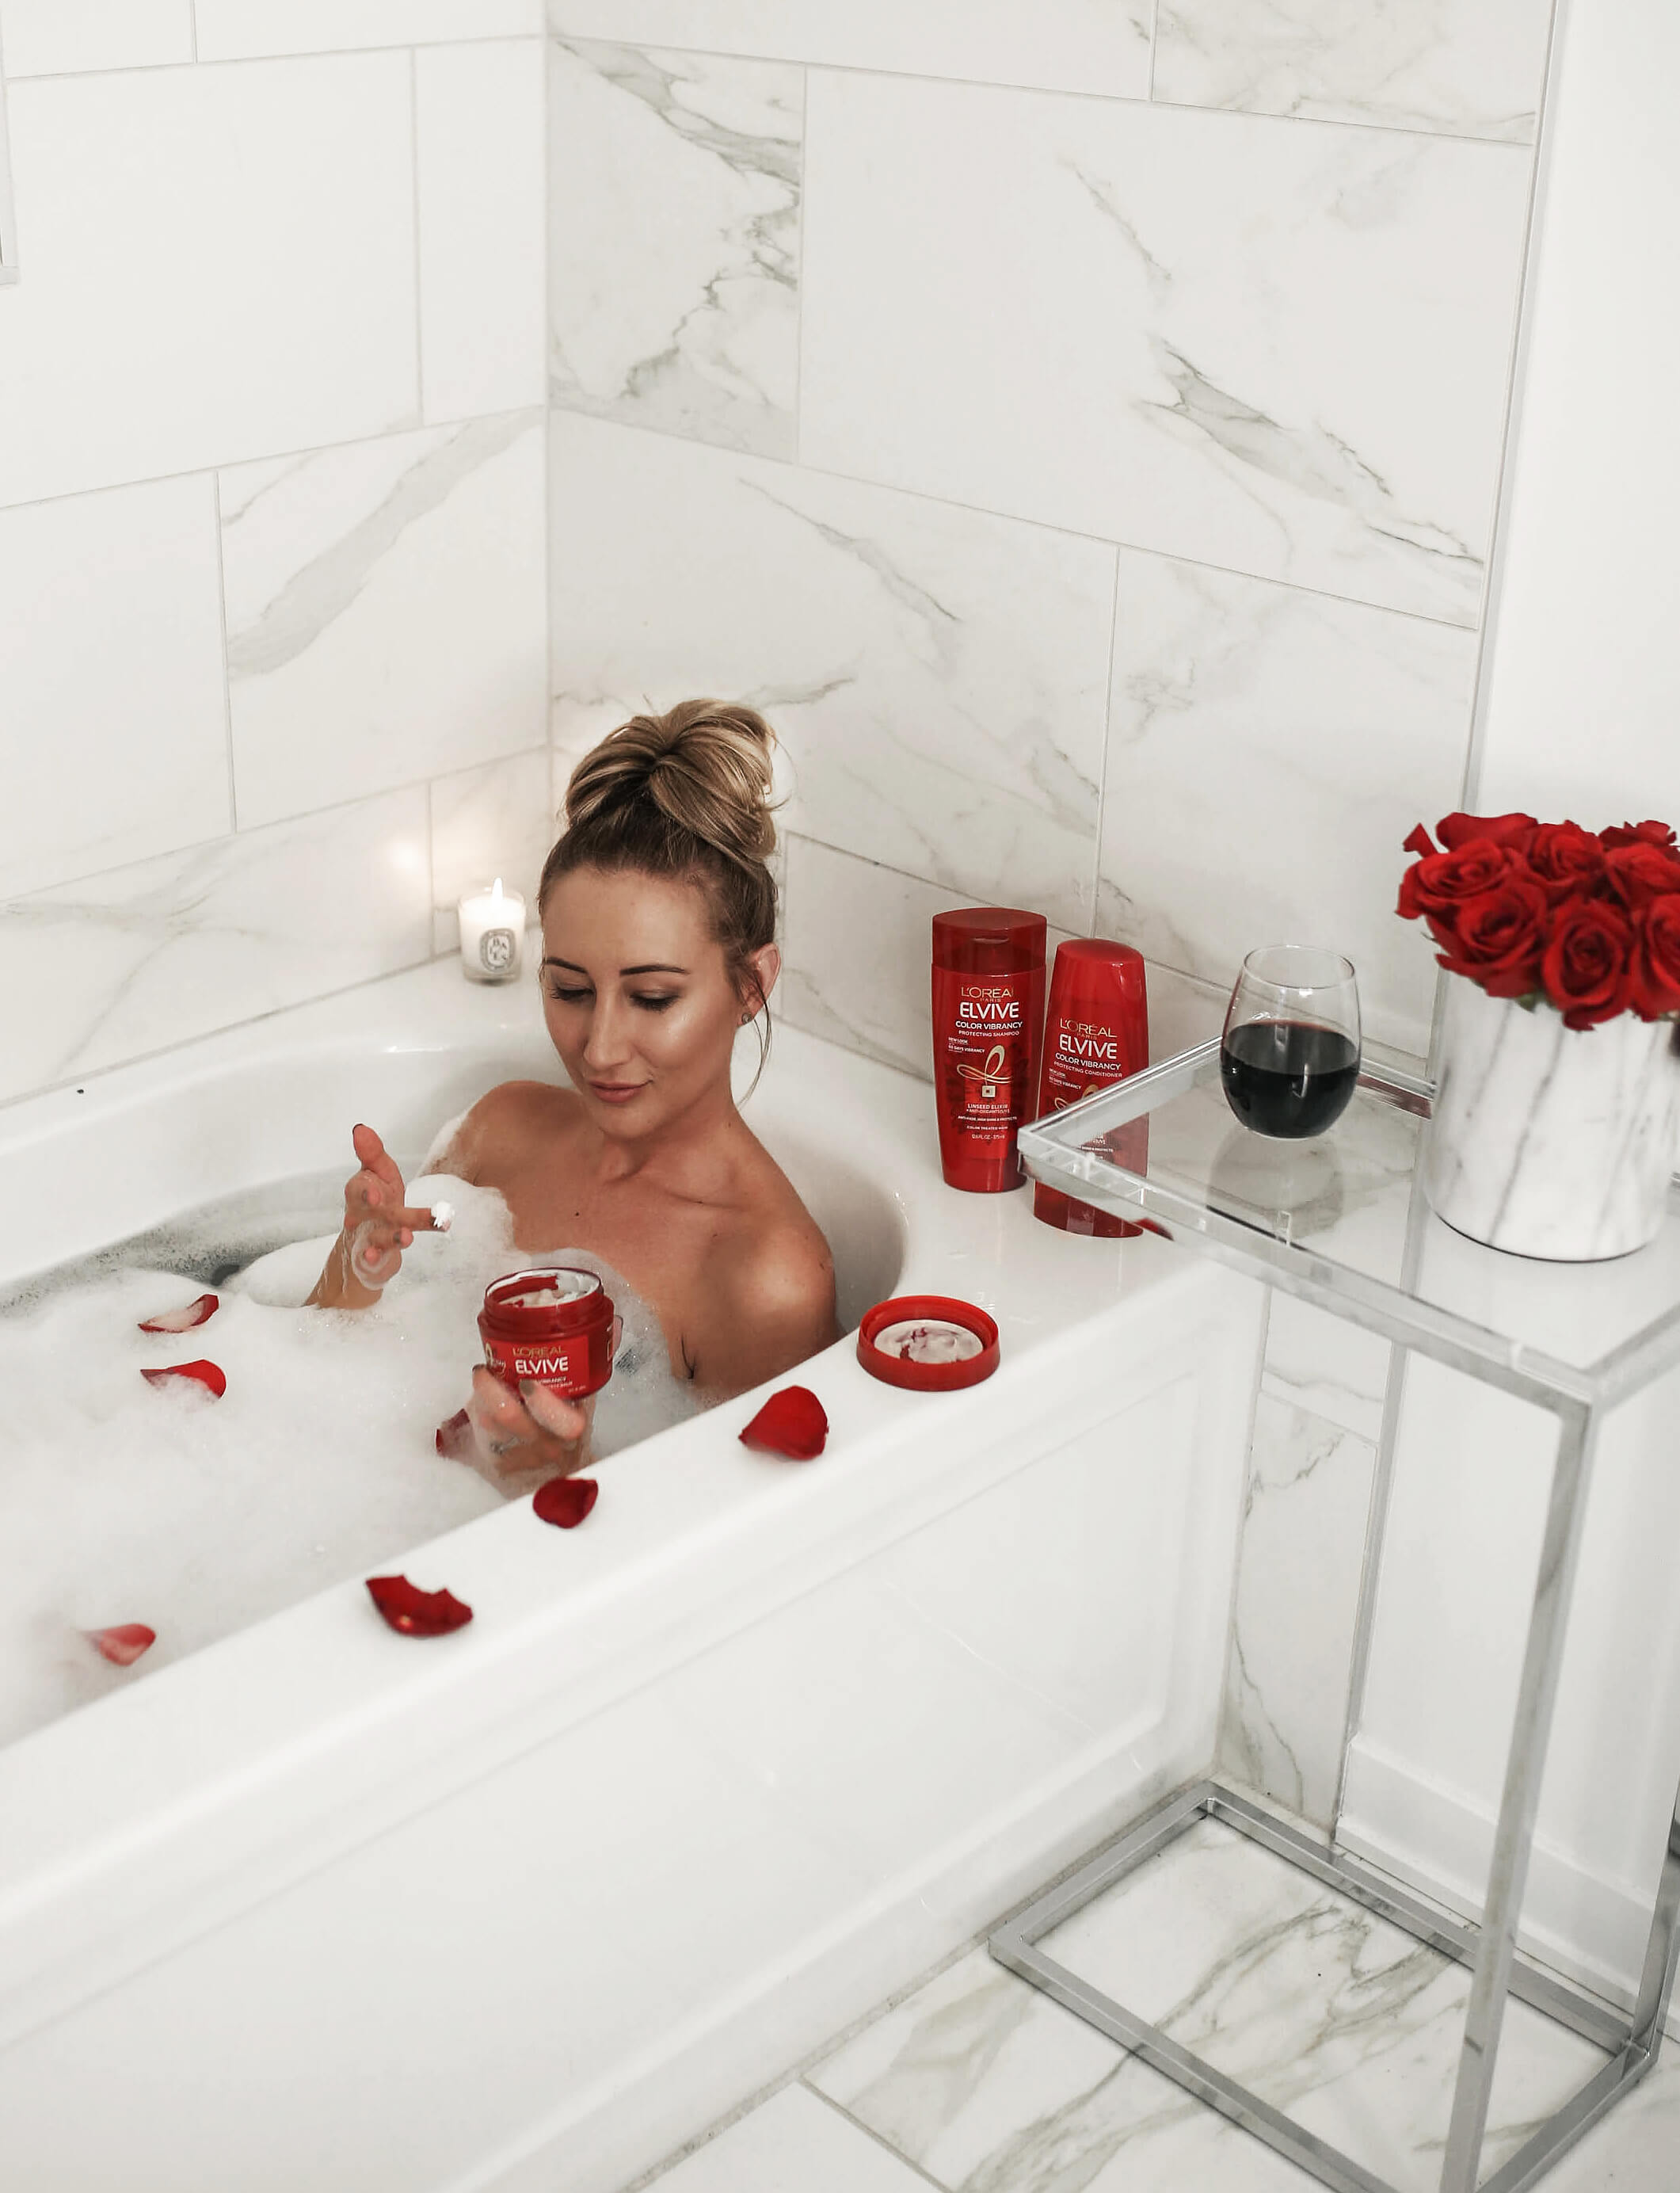 Carly Cristman, L'Oreal Elvive Color Vibrancy, Marble Bathroom, how to relax at home, Valentine's Day